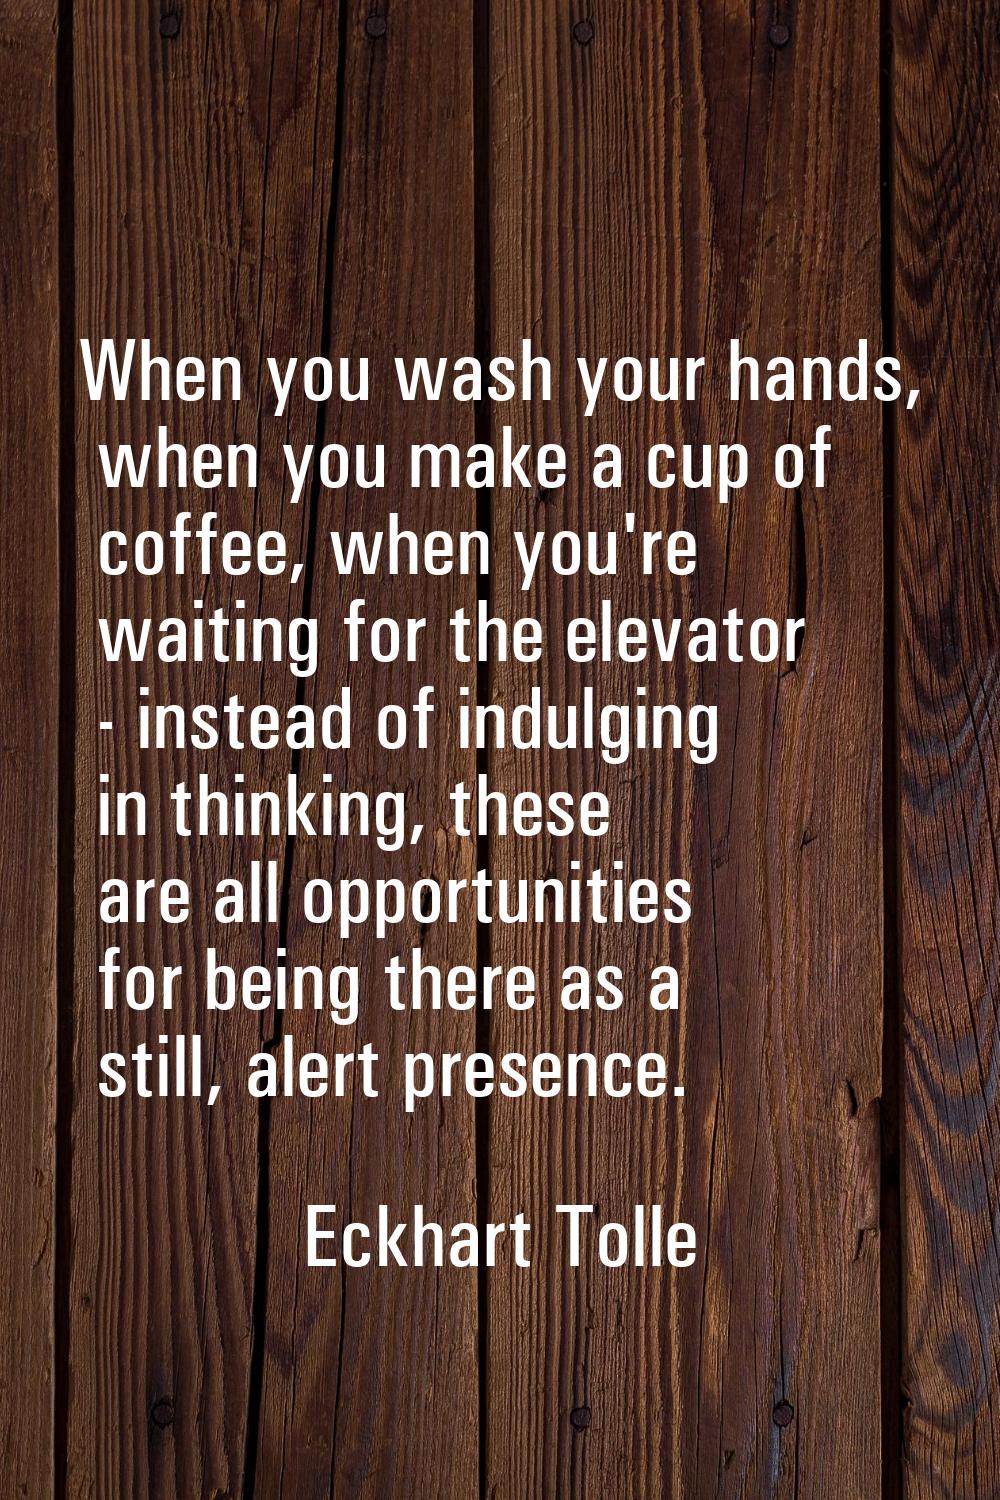 When you wash your hands, when you make a cup of coffee, when you're waiting for the elevator - ins